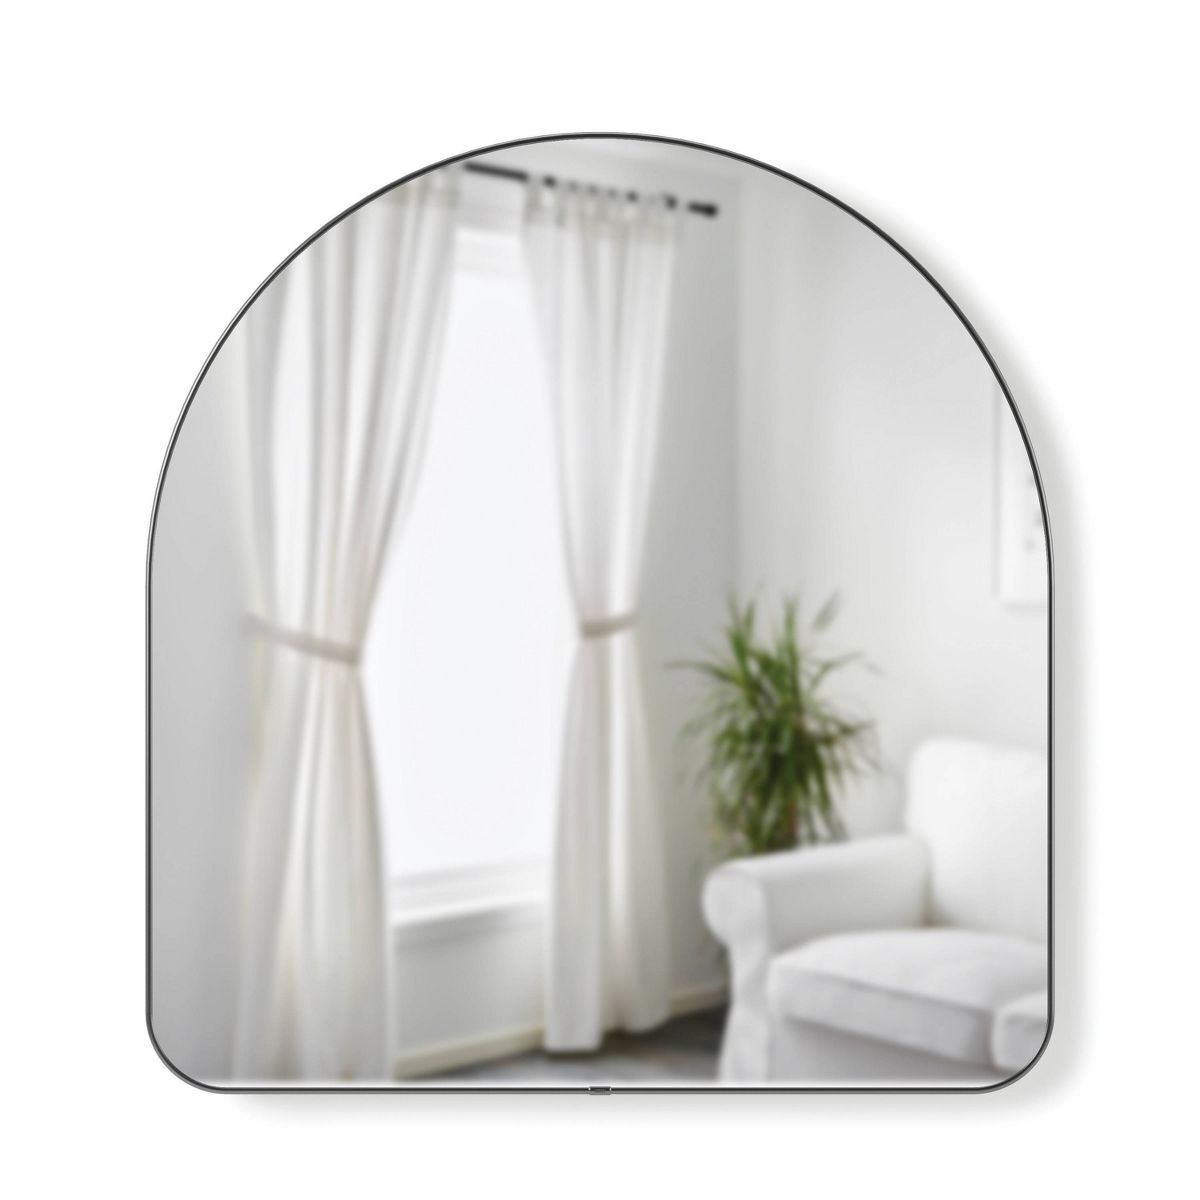 34" x 36" Hubba Arched Decorative Wall Mirror - Umbra | Target